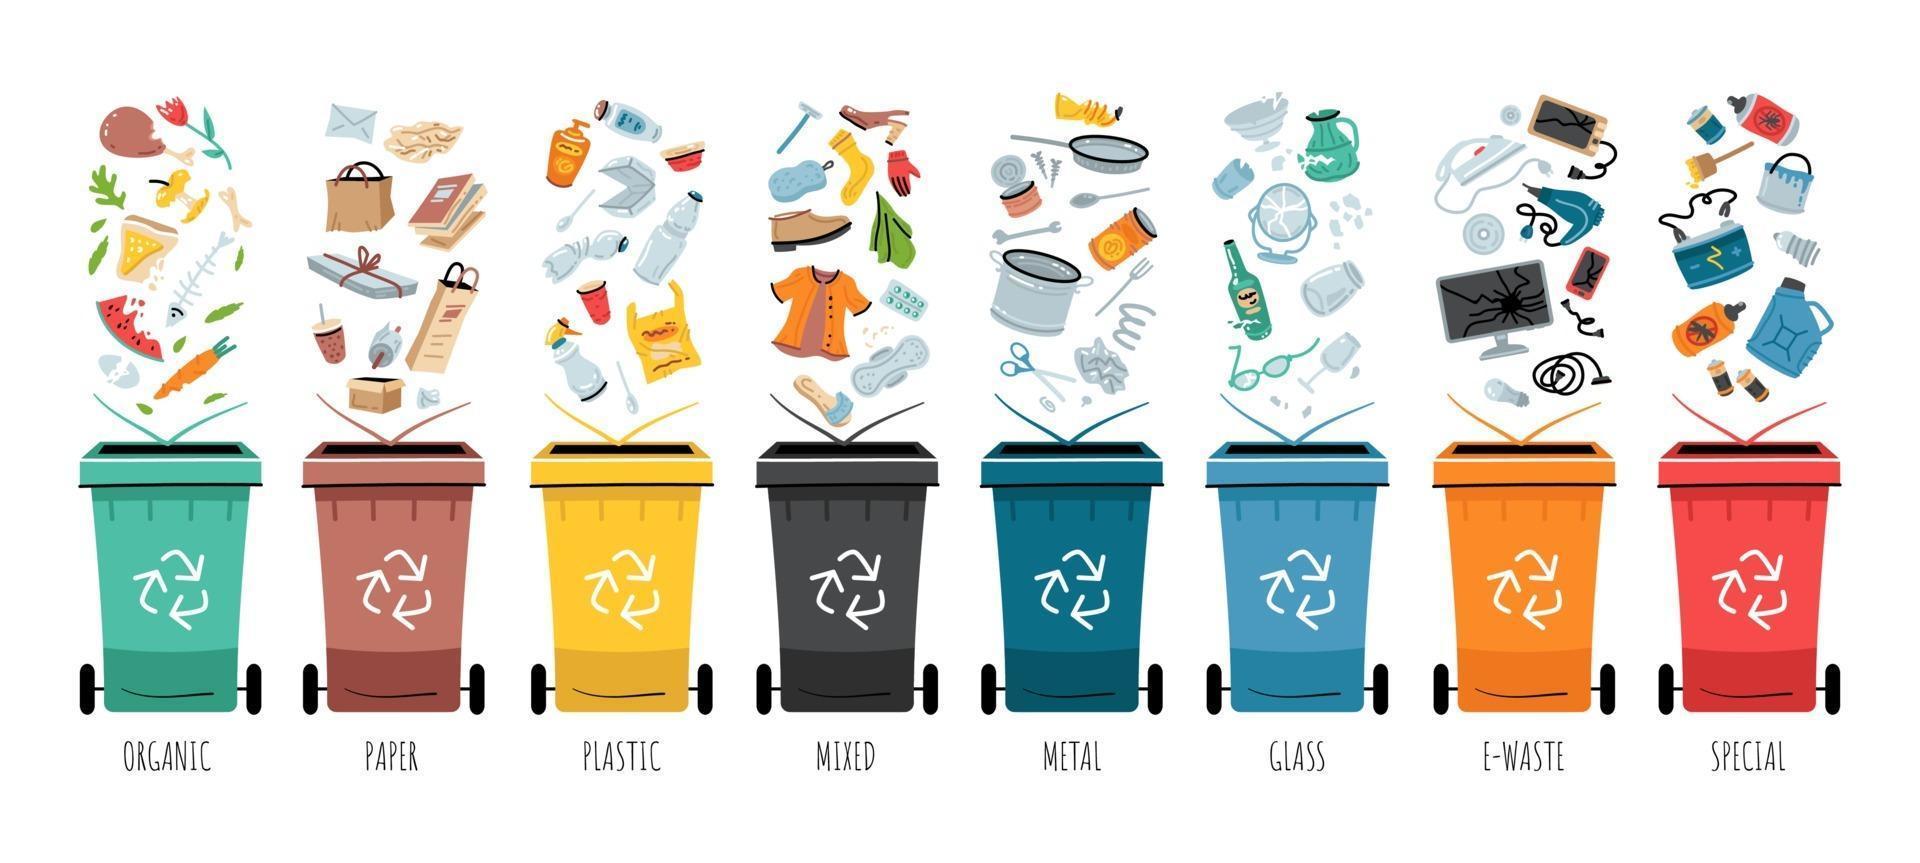 Waste collection, segregation and recycling illustration. Garbage vector